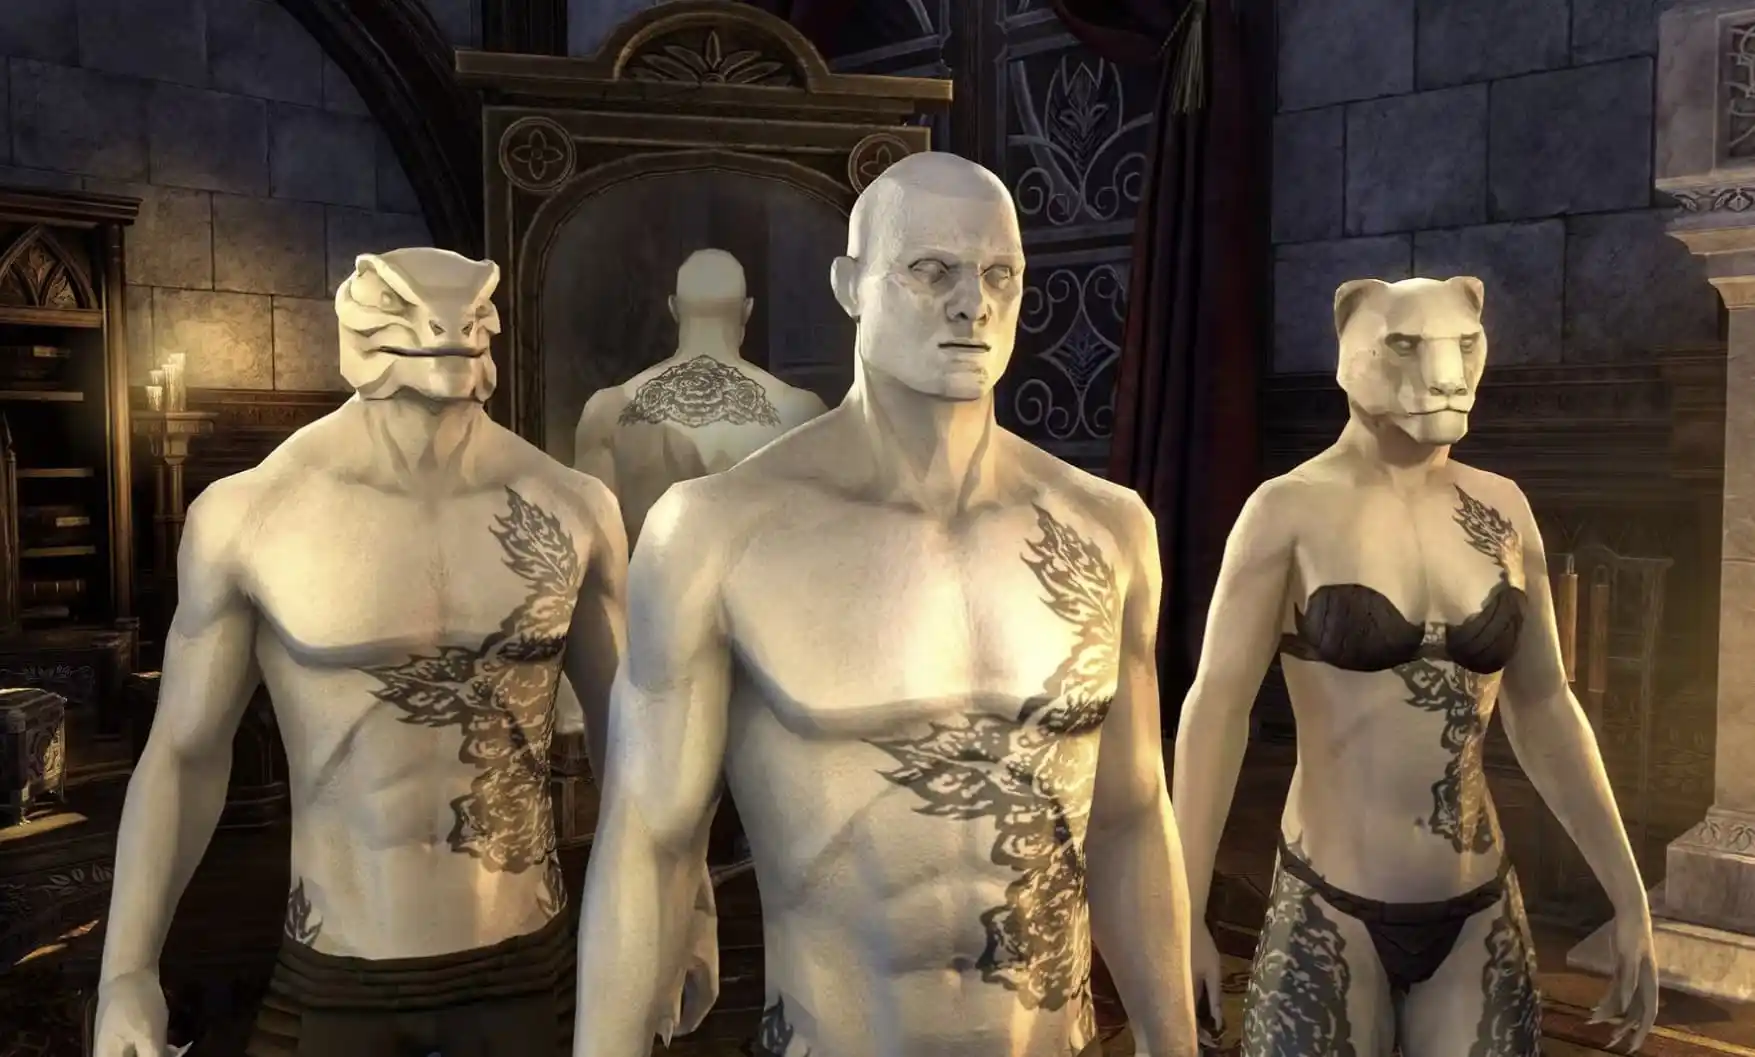 Three mannequins from ESO—an Argonian, a human, and a Khajiit—show readers what the Rose of Tamriel body marking looks like on each of the three body types.